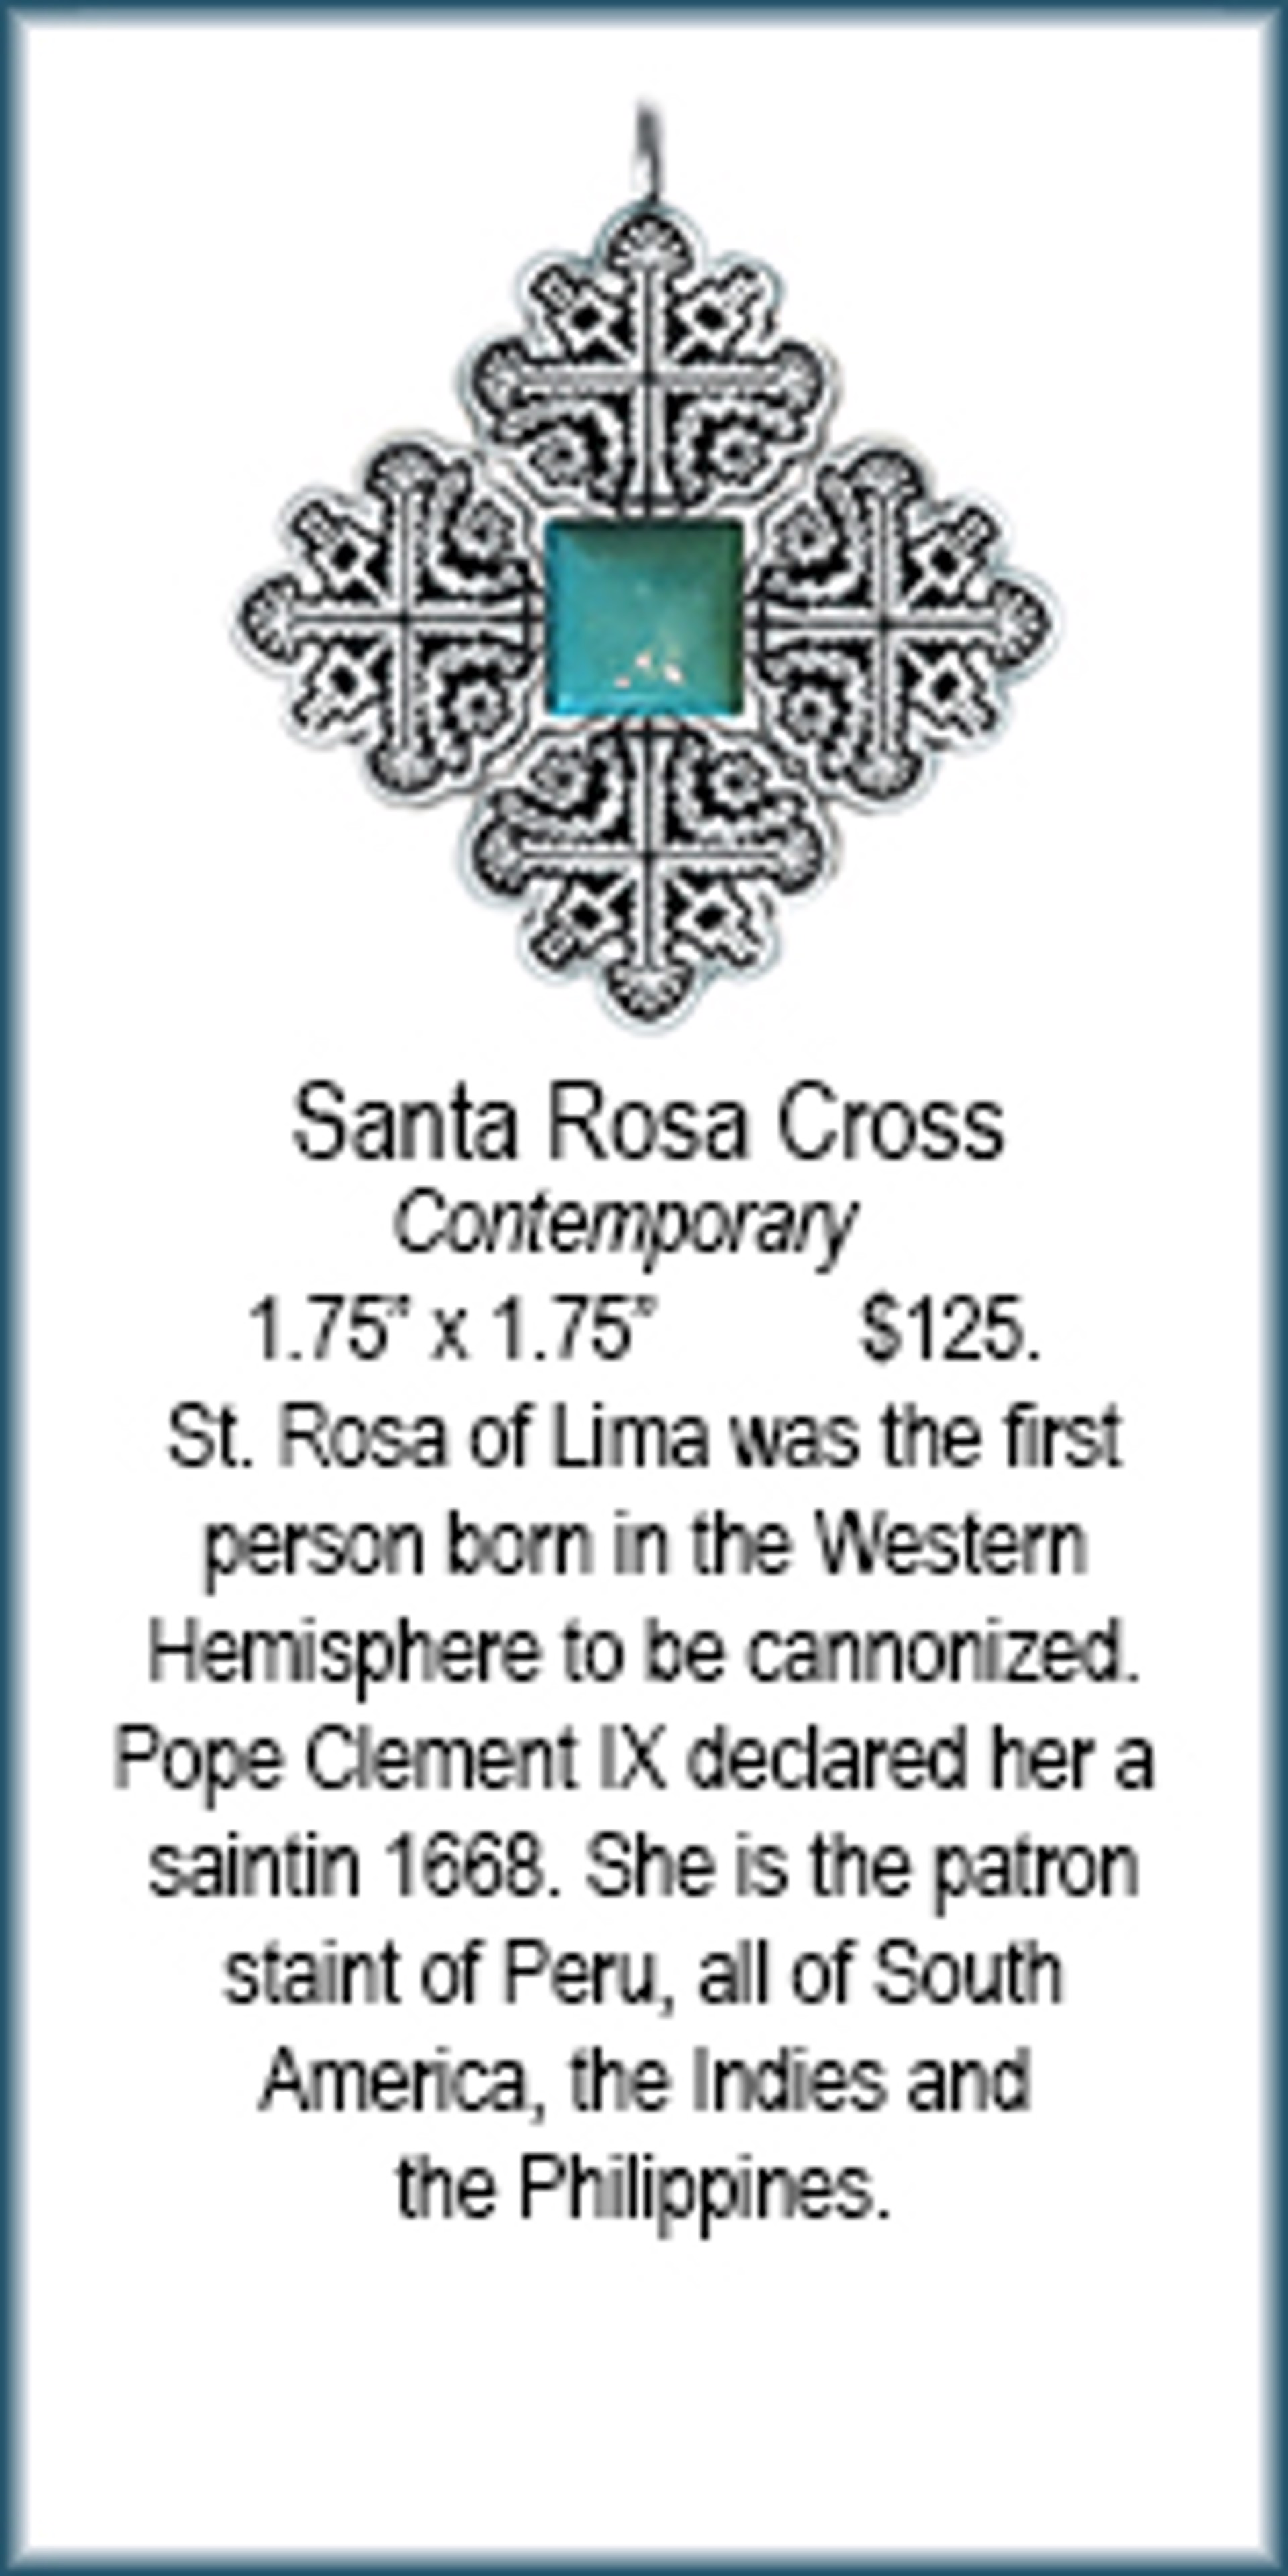 Cross - Santa Rosa with Turquoise by Deanne McKeown